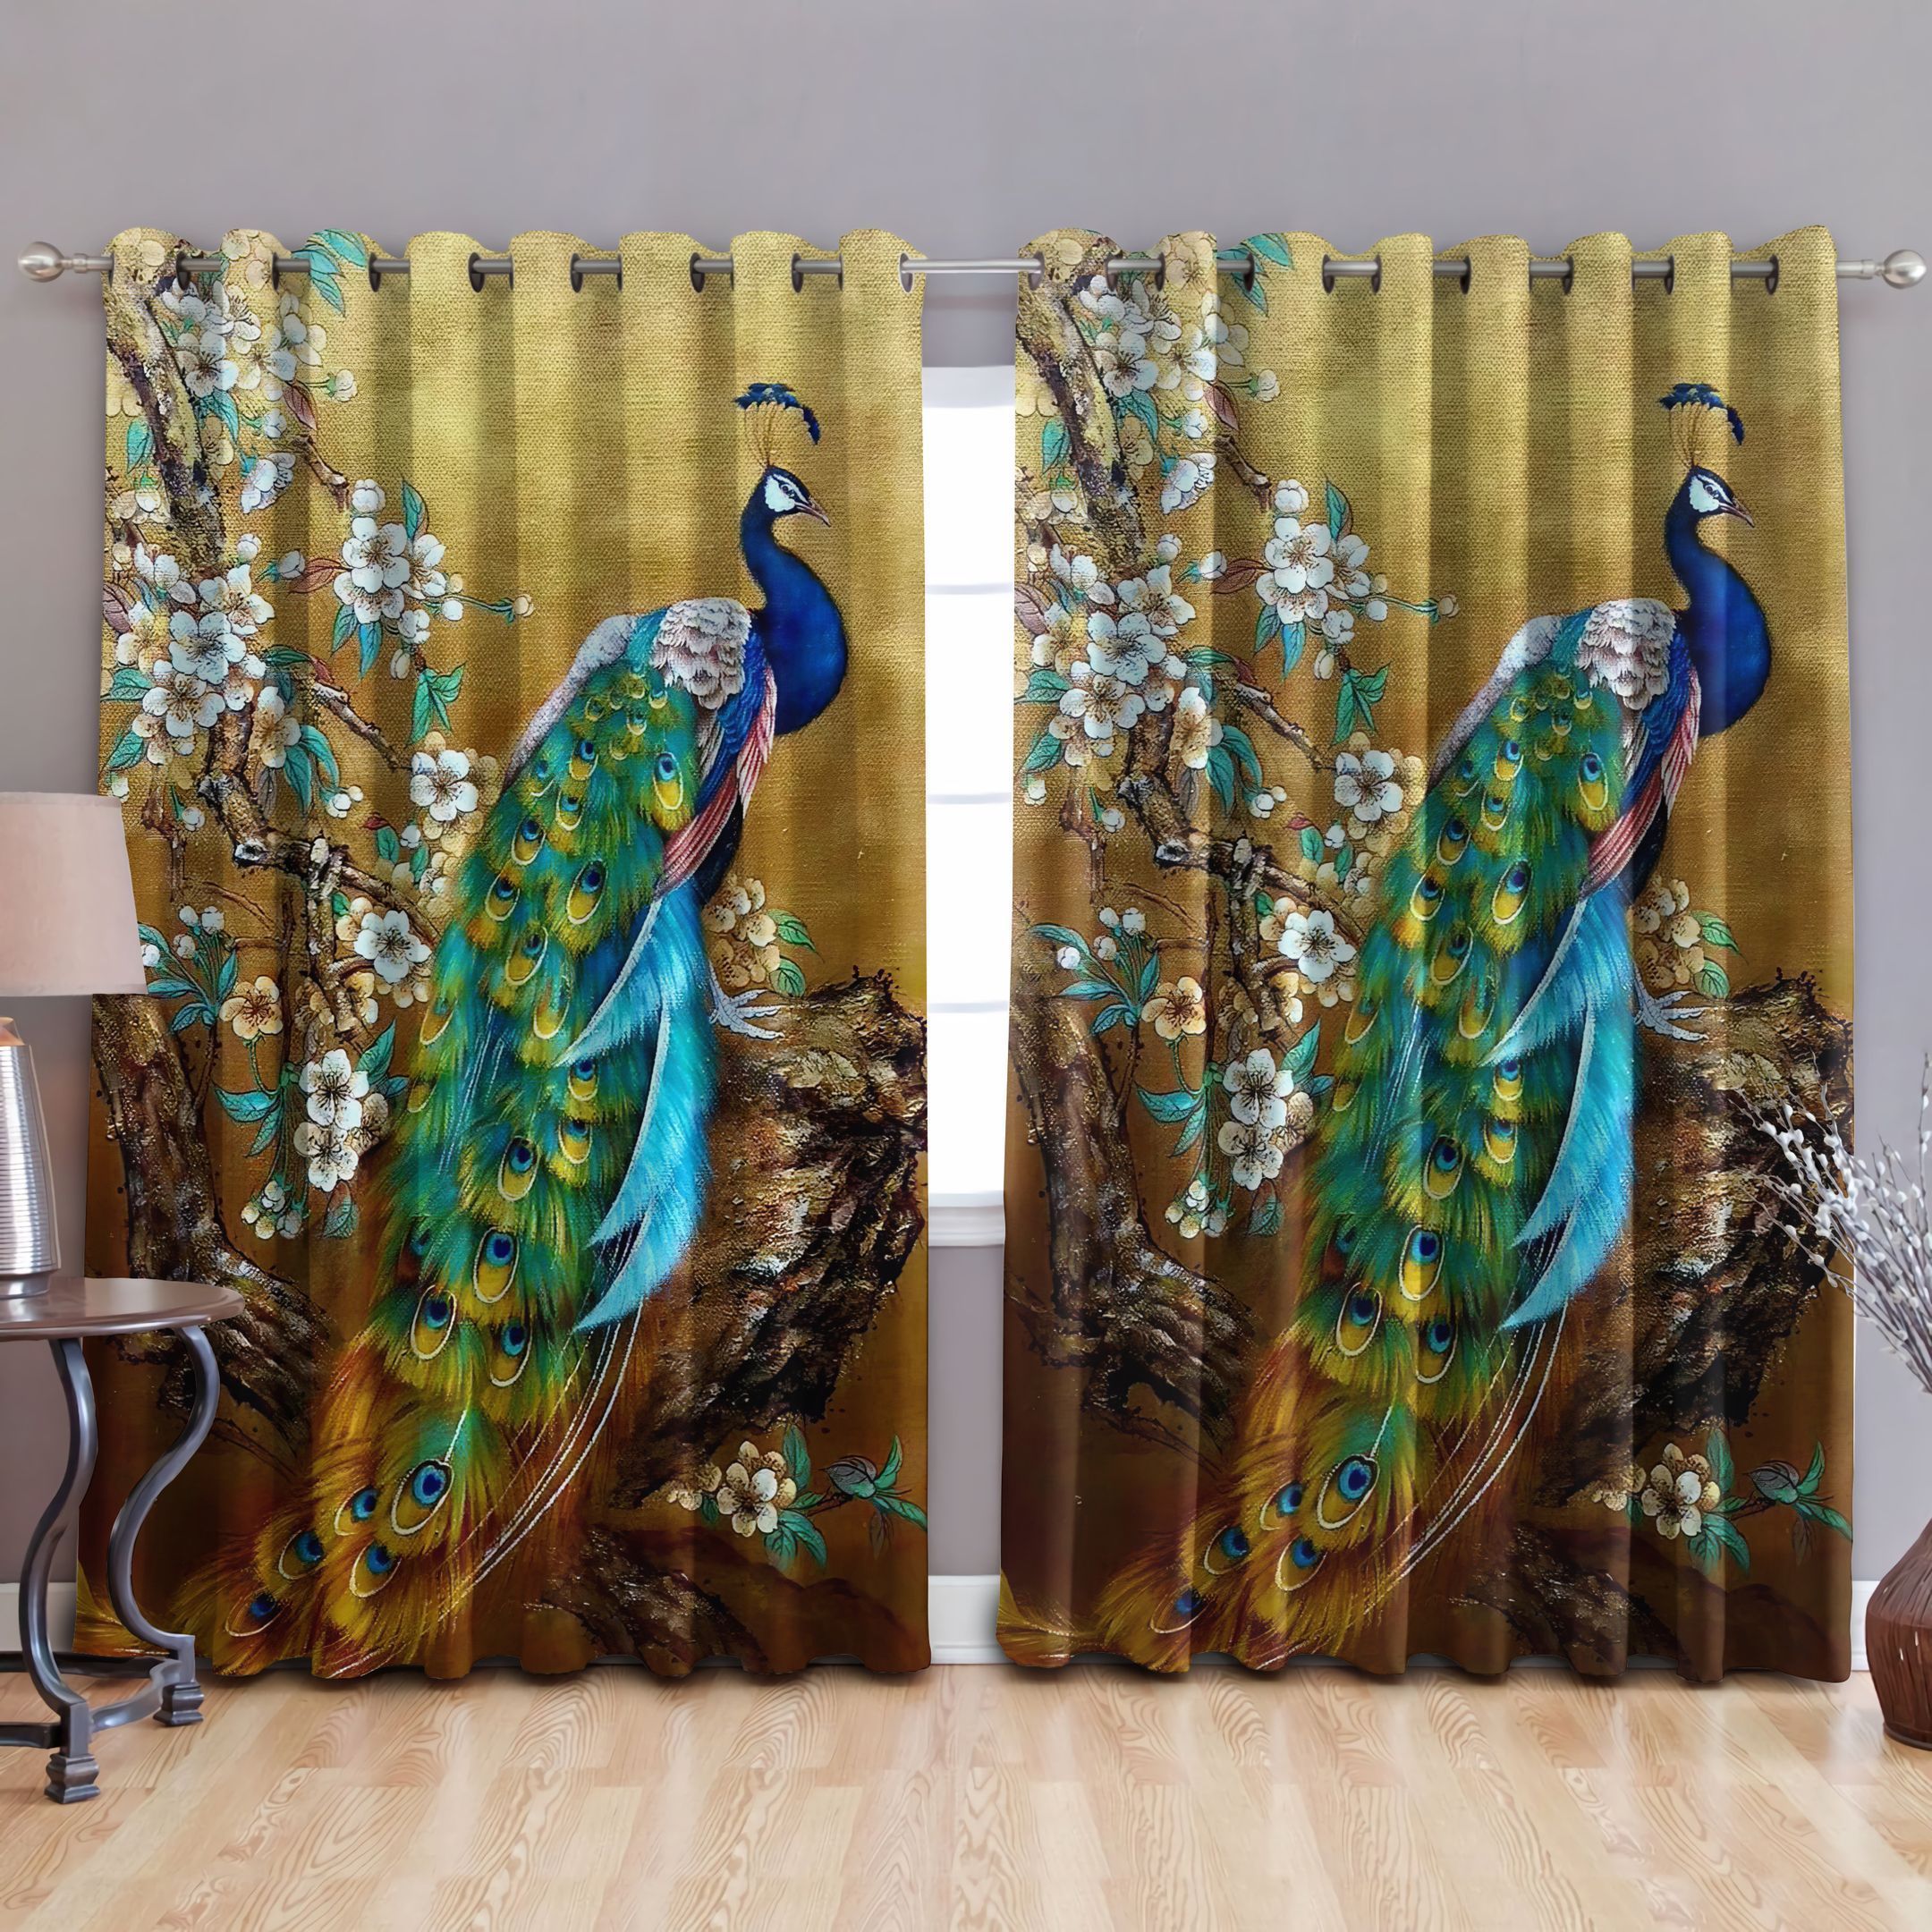 Vibrant Peacock Printed Window Curtains Home Decor